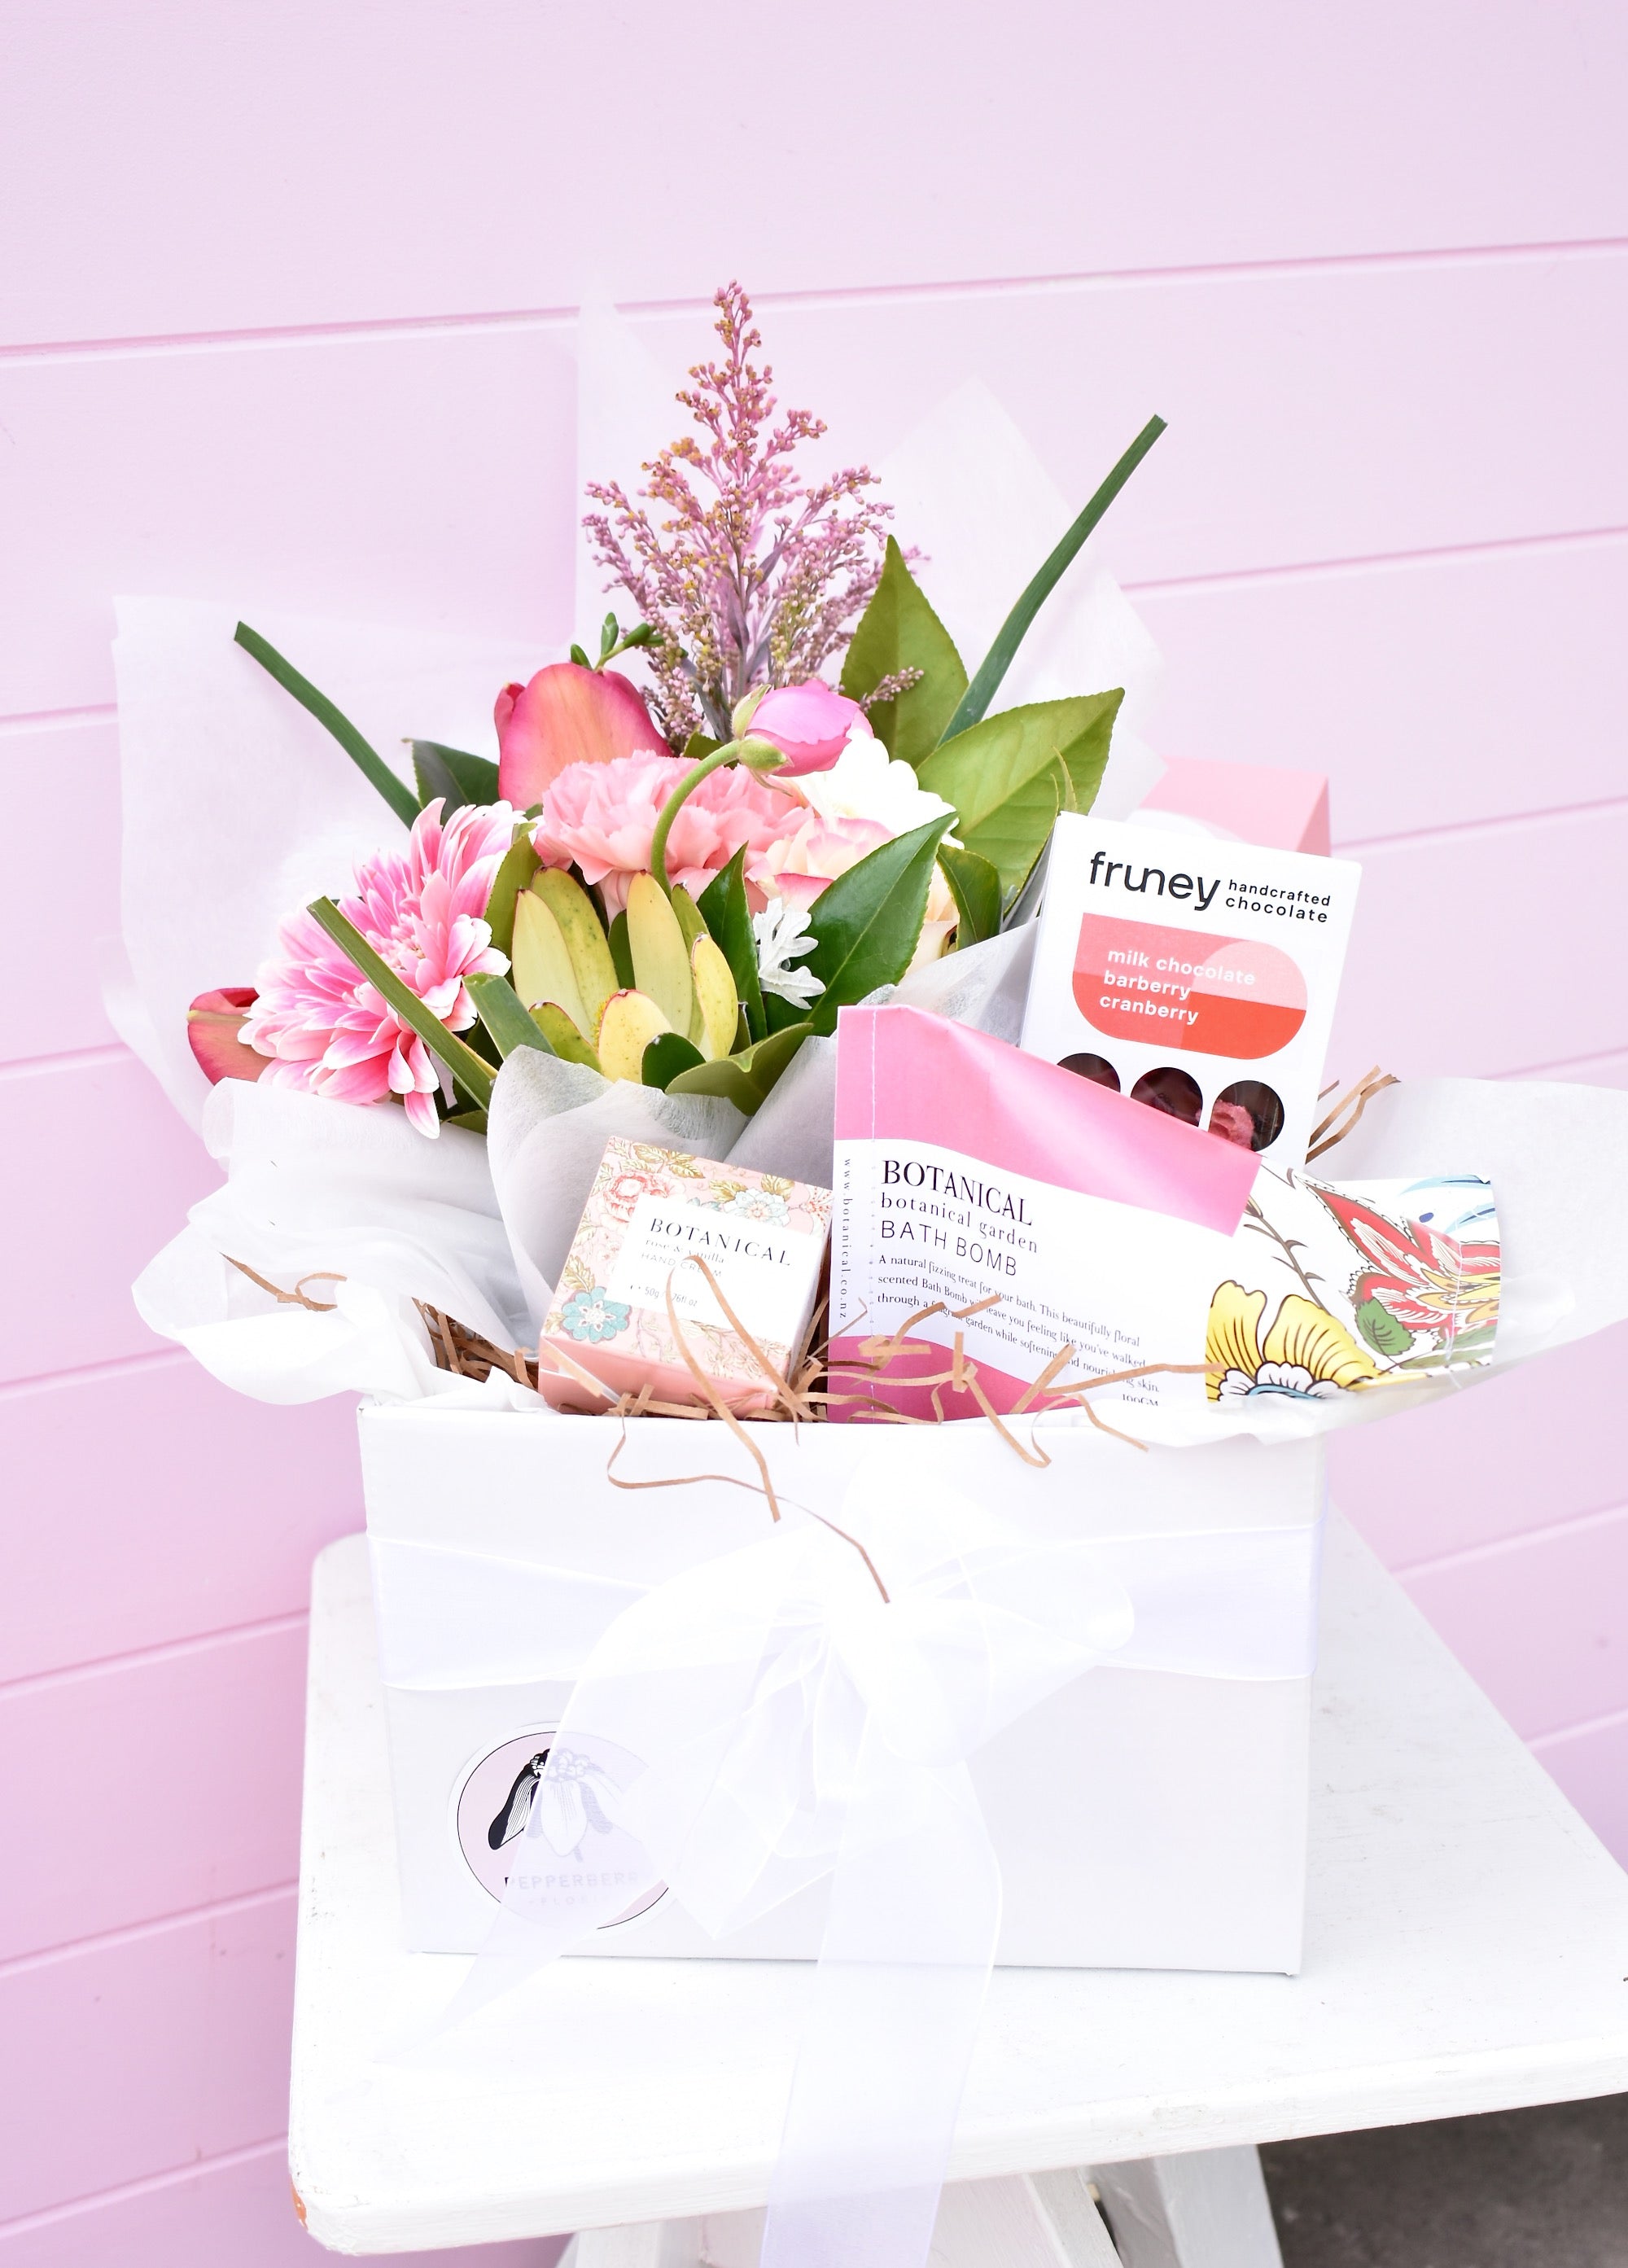 Pink and white gift hamper created by a florist. Containing a bouquet of fresh flowers, hand cream, bath bomb, rose tea and chocolate bar. Presented in white box with tissue.